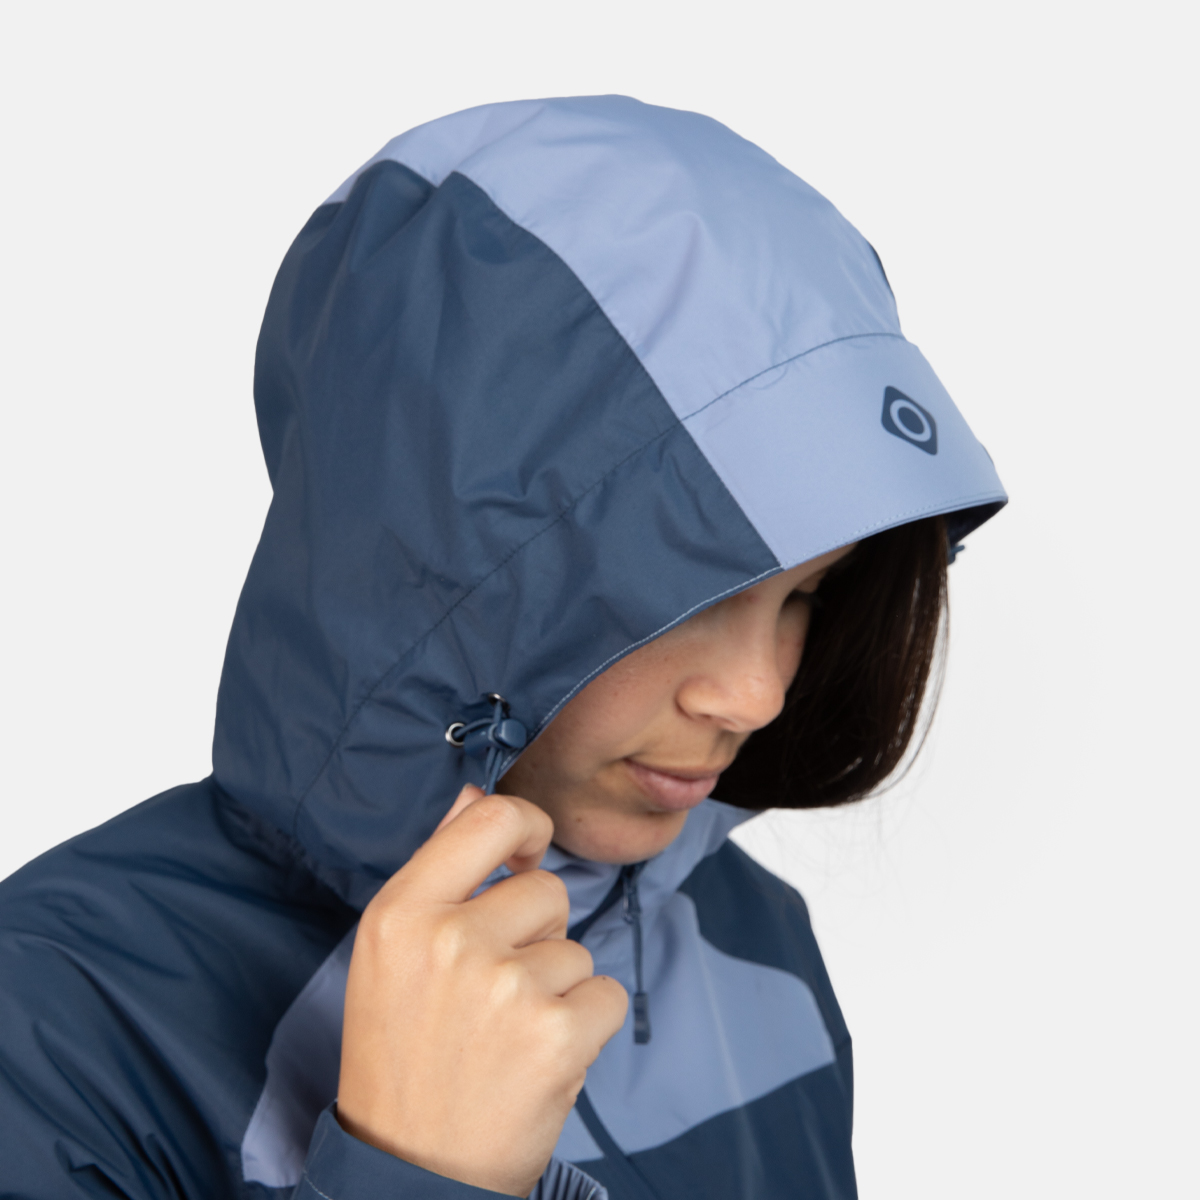  CHAQUETA TÉCNICA IMPERMEABLE AZUL MUJER PONS W